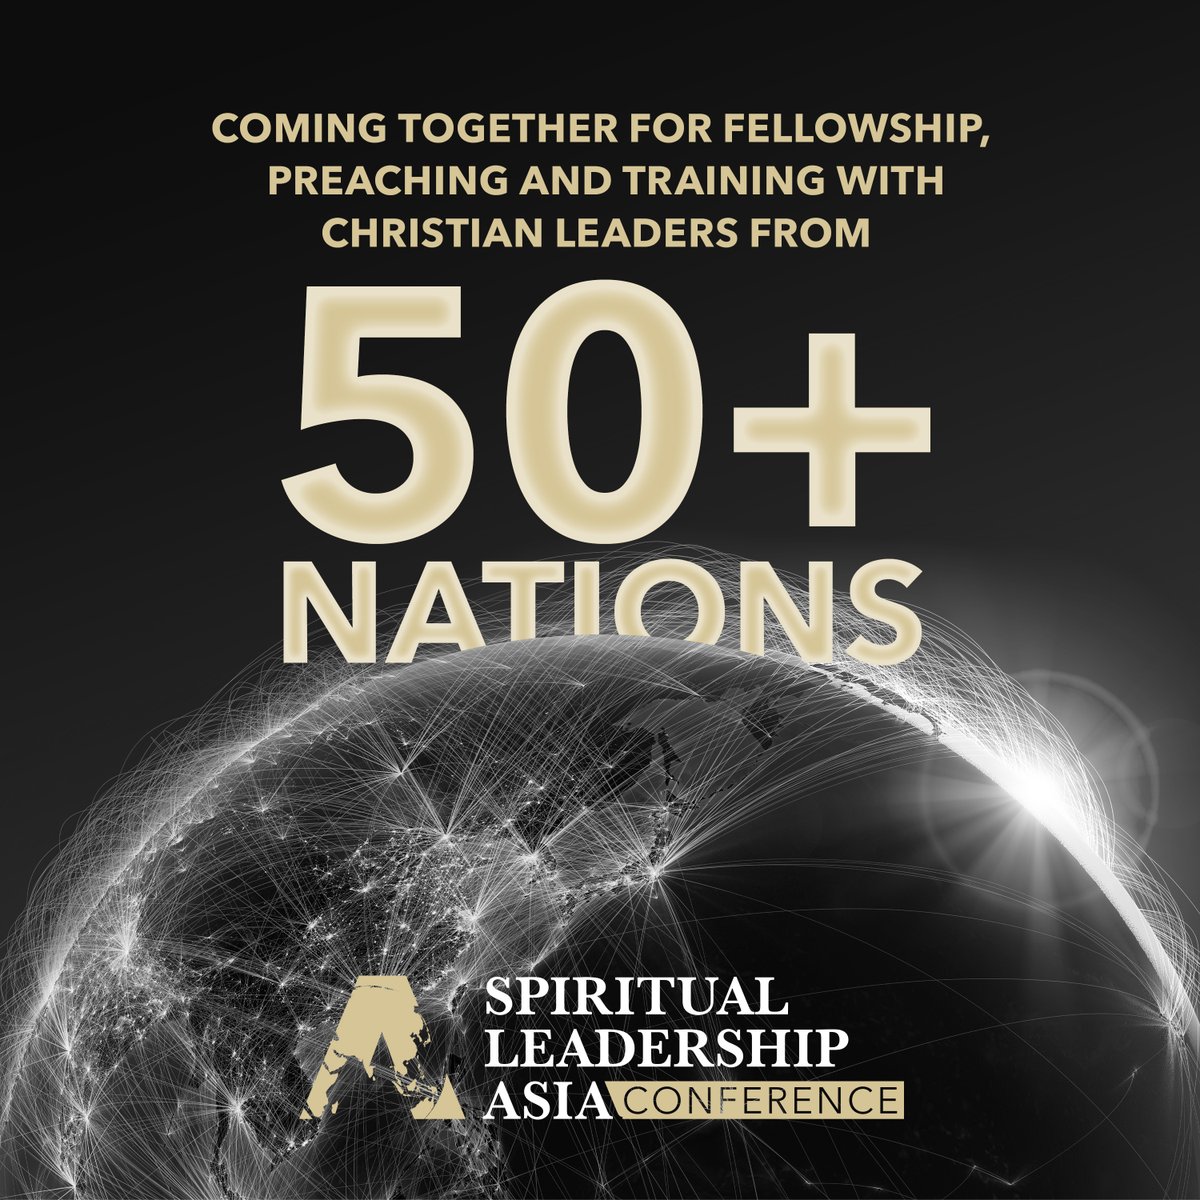 We are just 10 days from the start of Spiritual Leadership Asia Conference in Manila. There is still time to register at bit.ly/3vxEacg. If you are in the metro Manila area, join us for evening services at 7pm 28 Feb–2 March no registration needed.